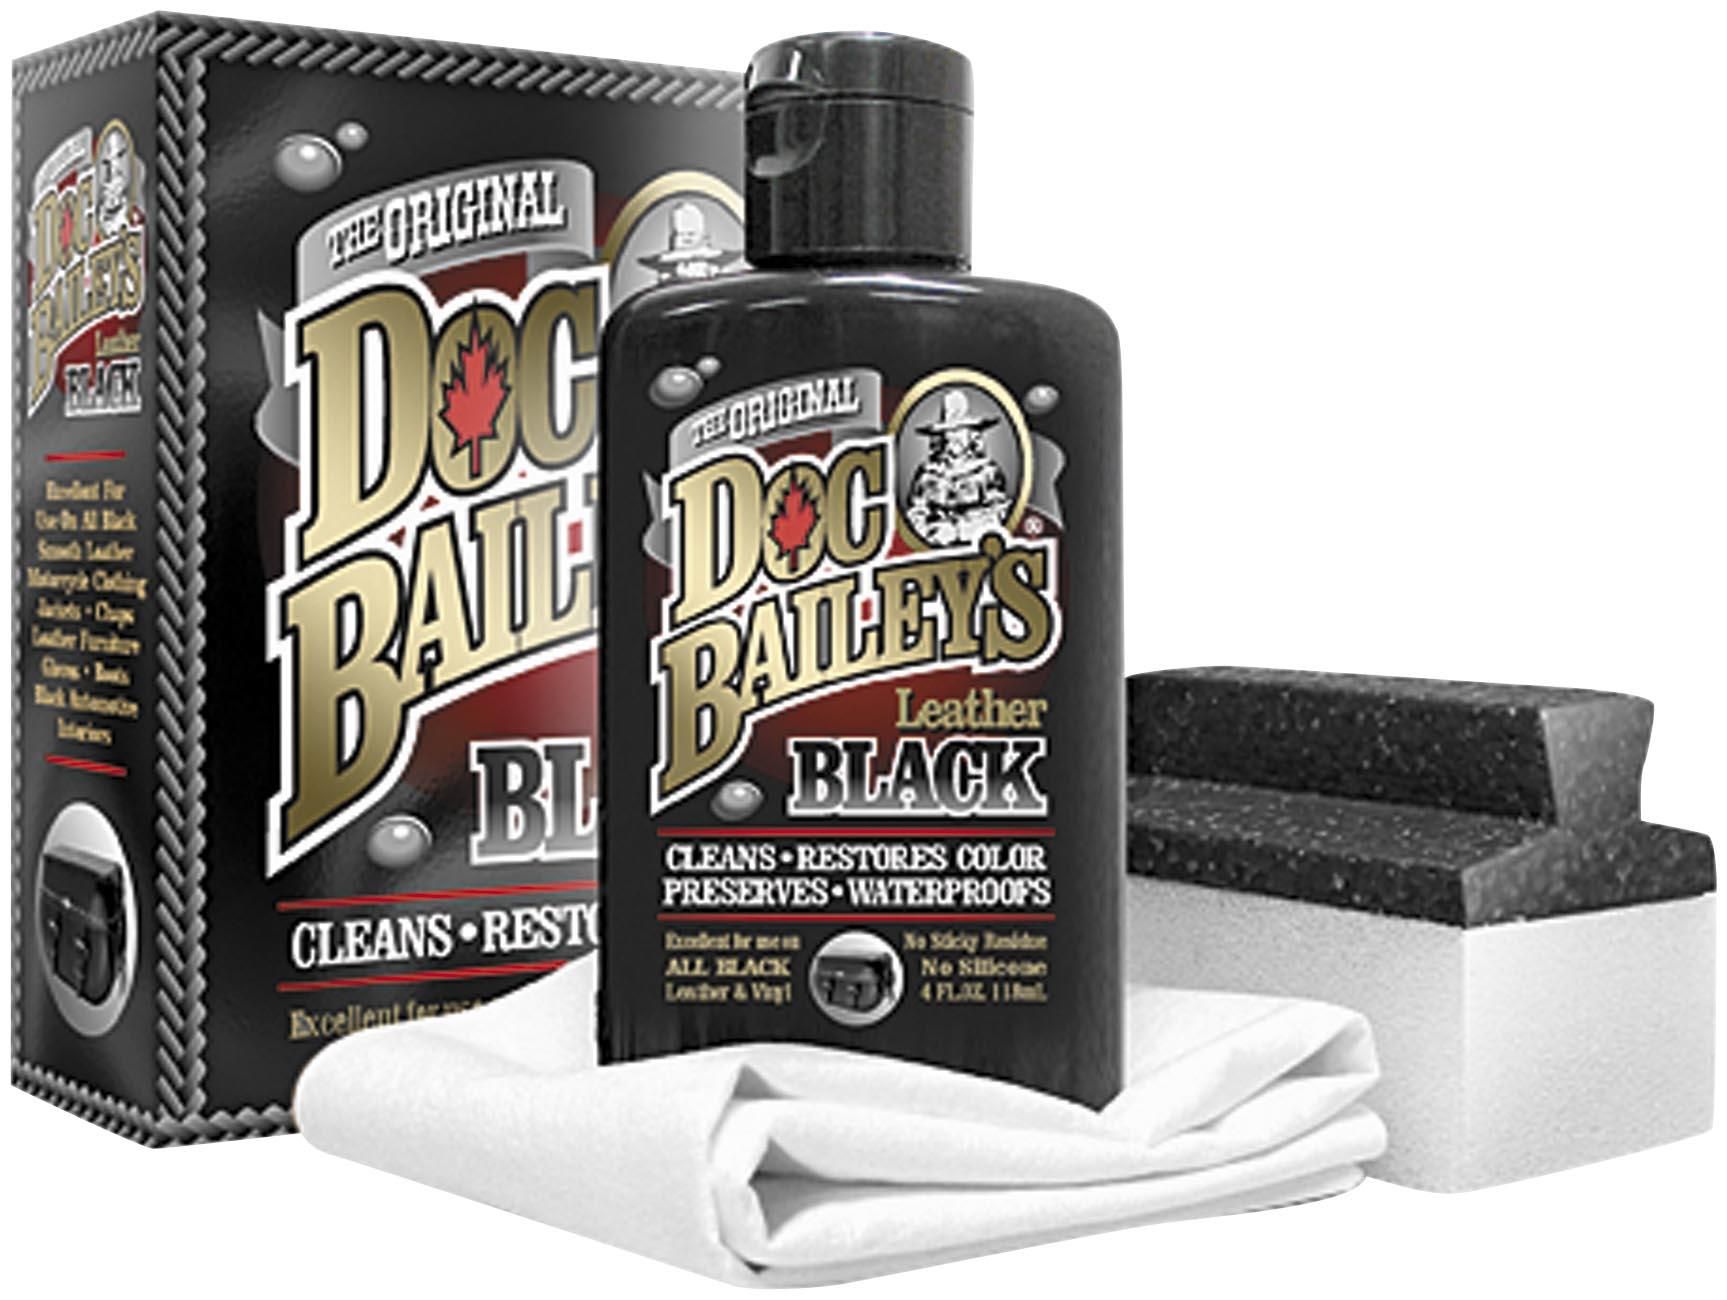 4MZX-DOC-BAILEY-80004-12 Leather Black Detail Kit